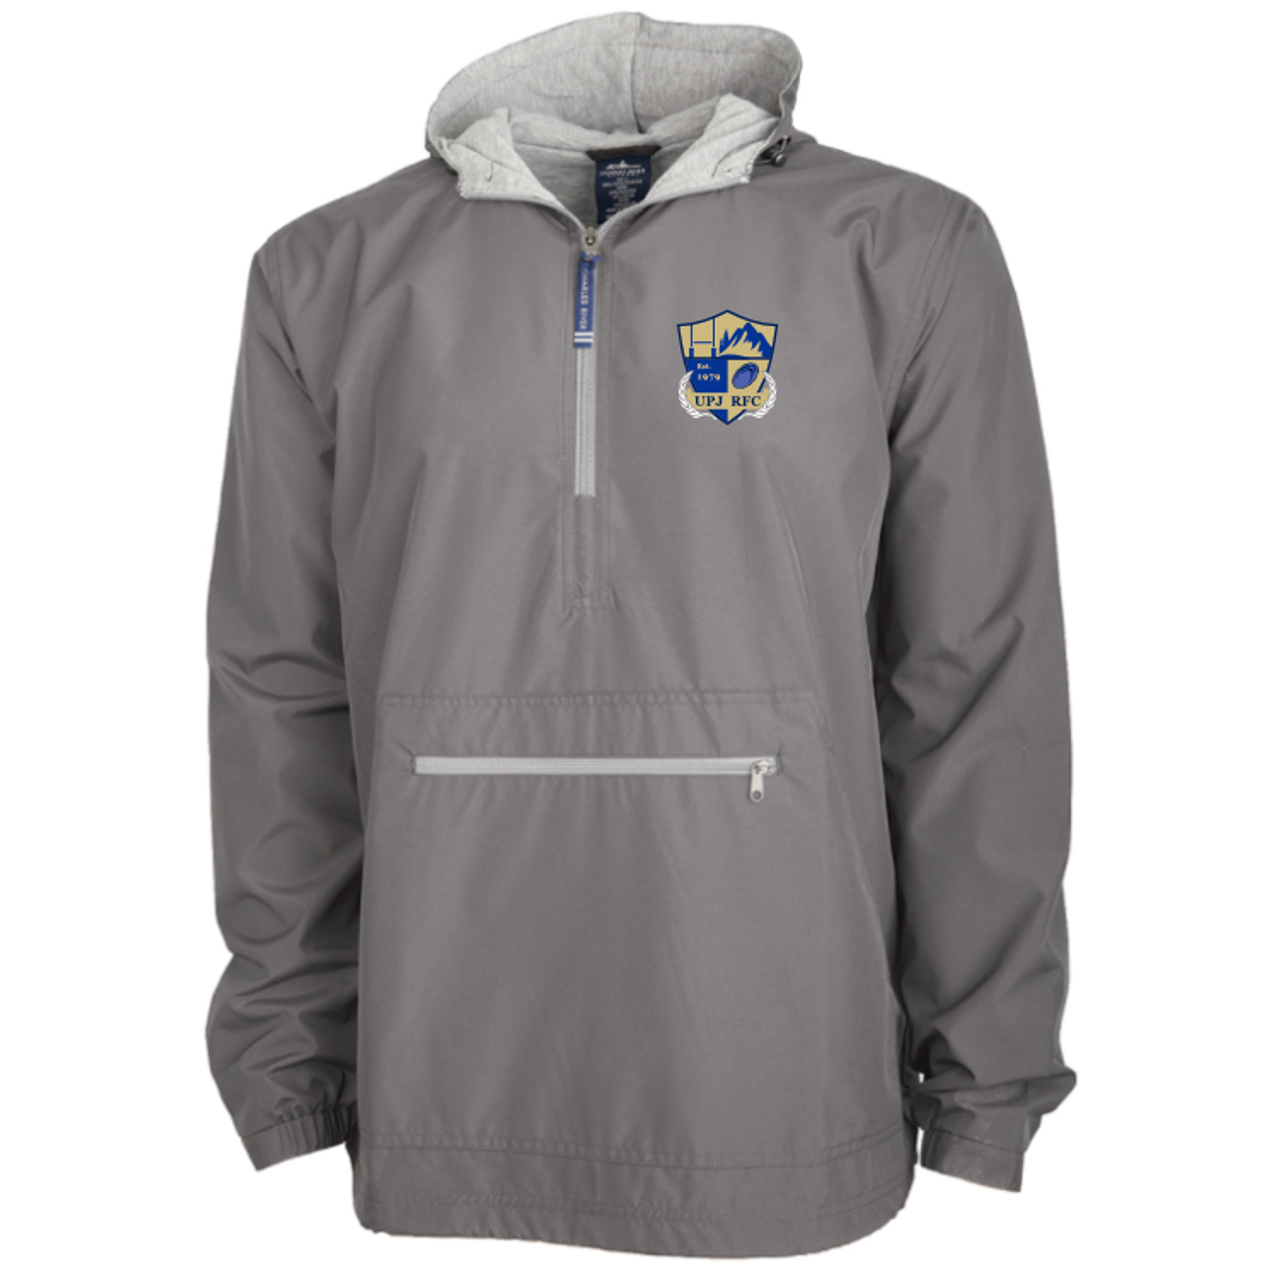 UPJ Rugby Pullover Anorak